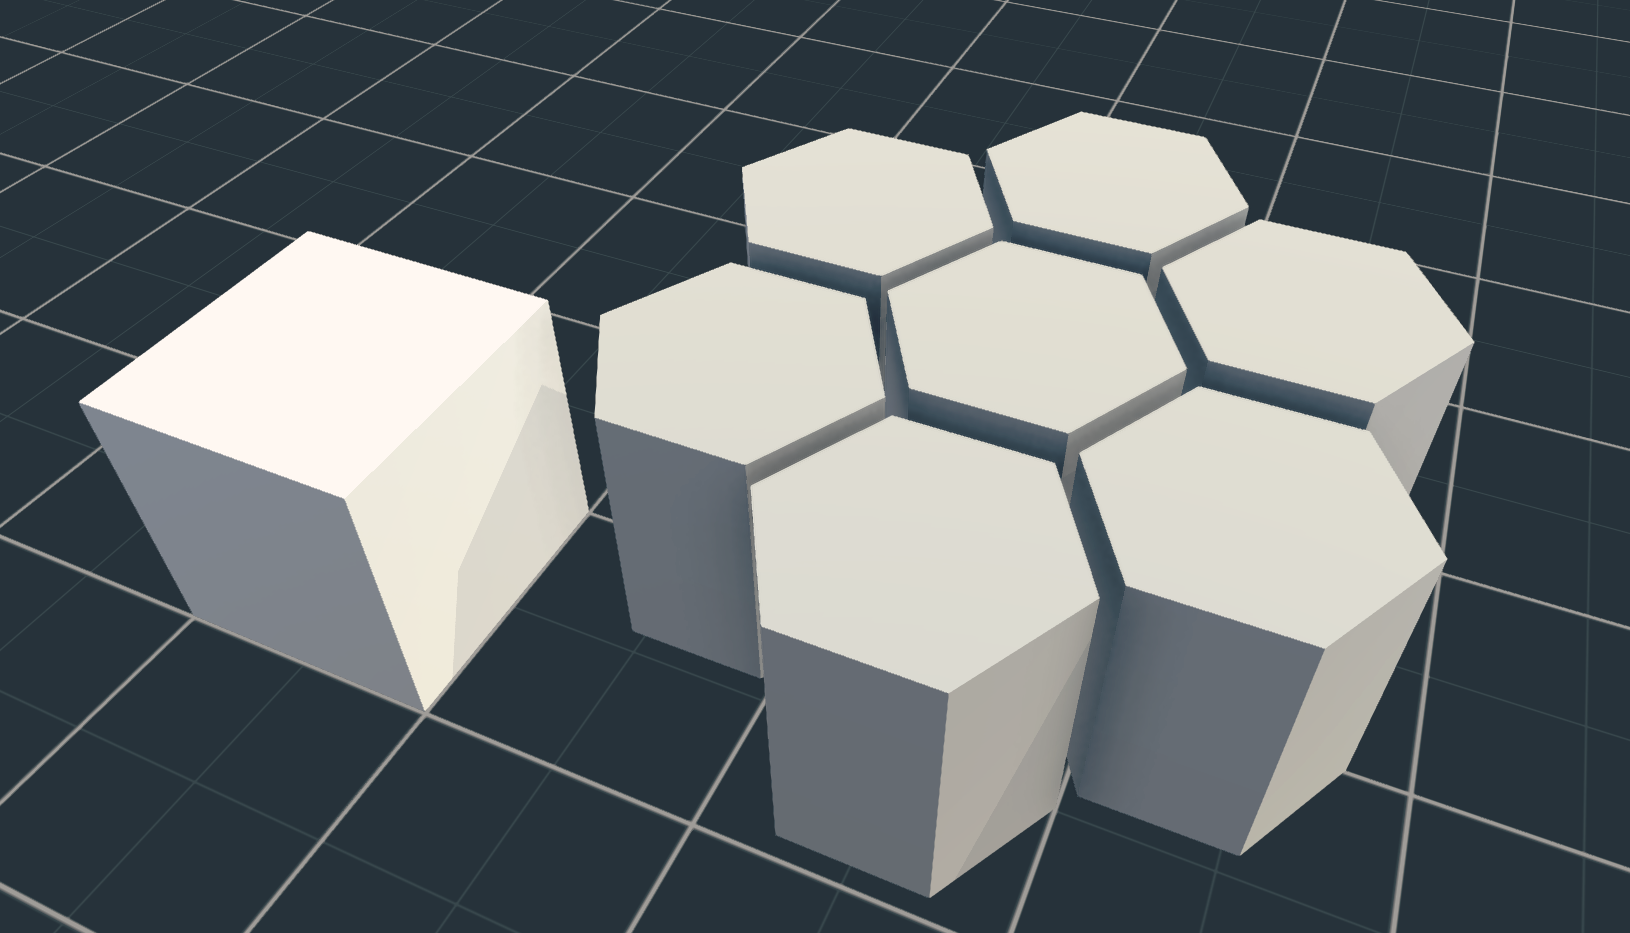 7 hexagons and a square